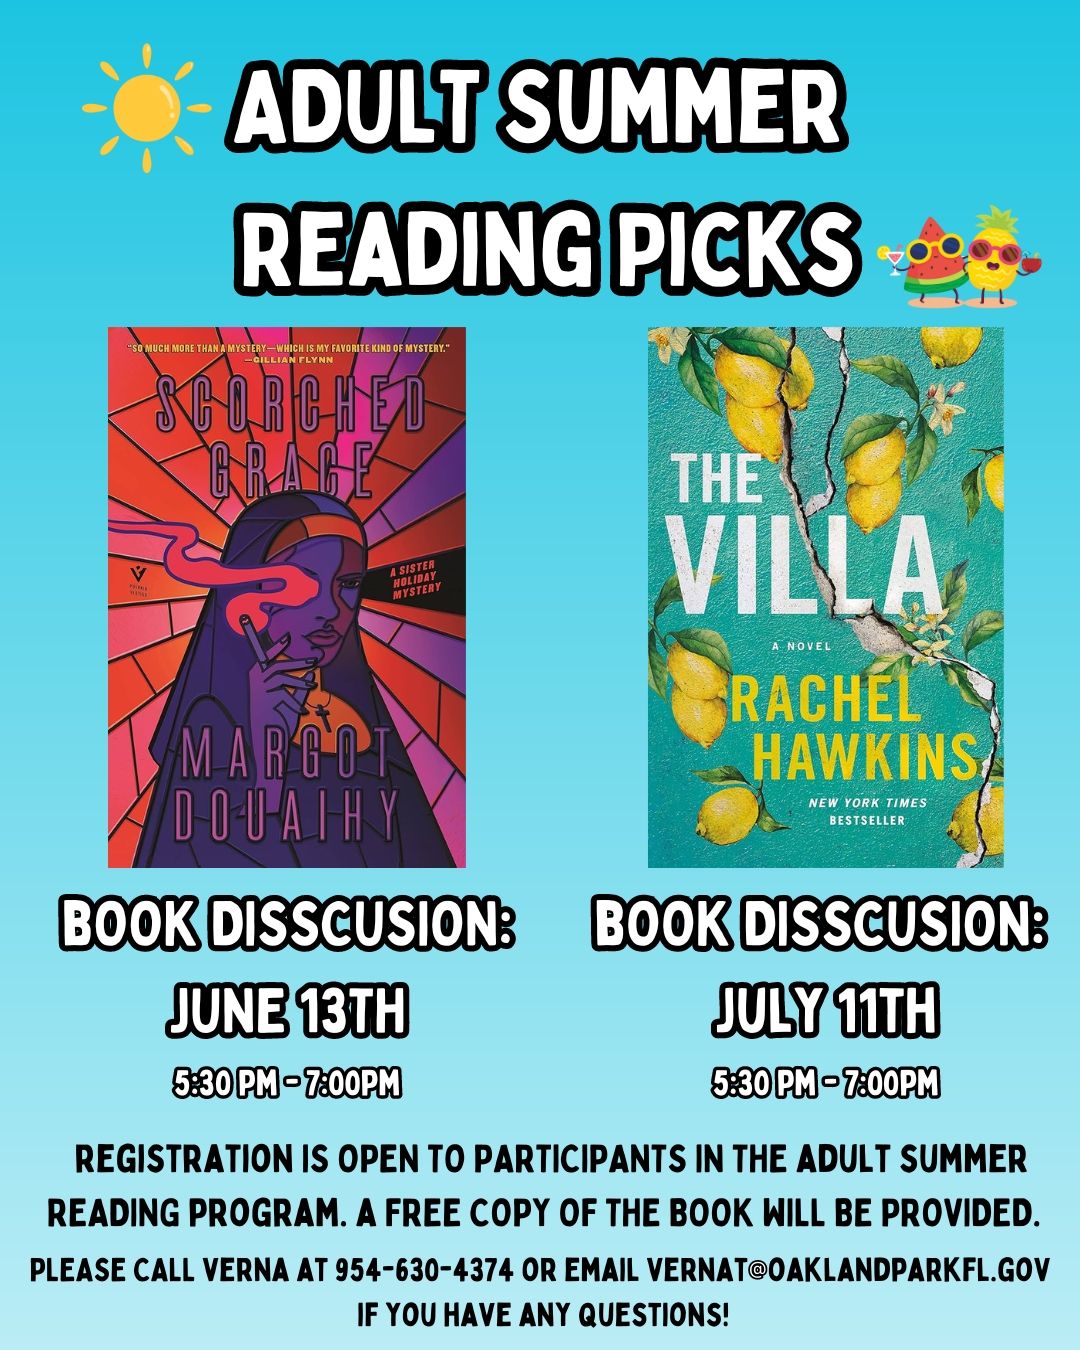 Adult Summer Reading Program - The Villa Book Discussion